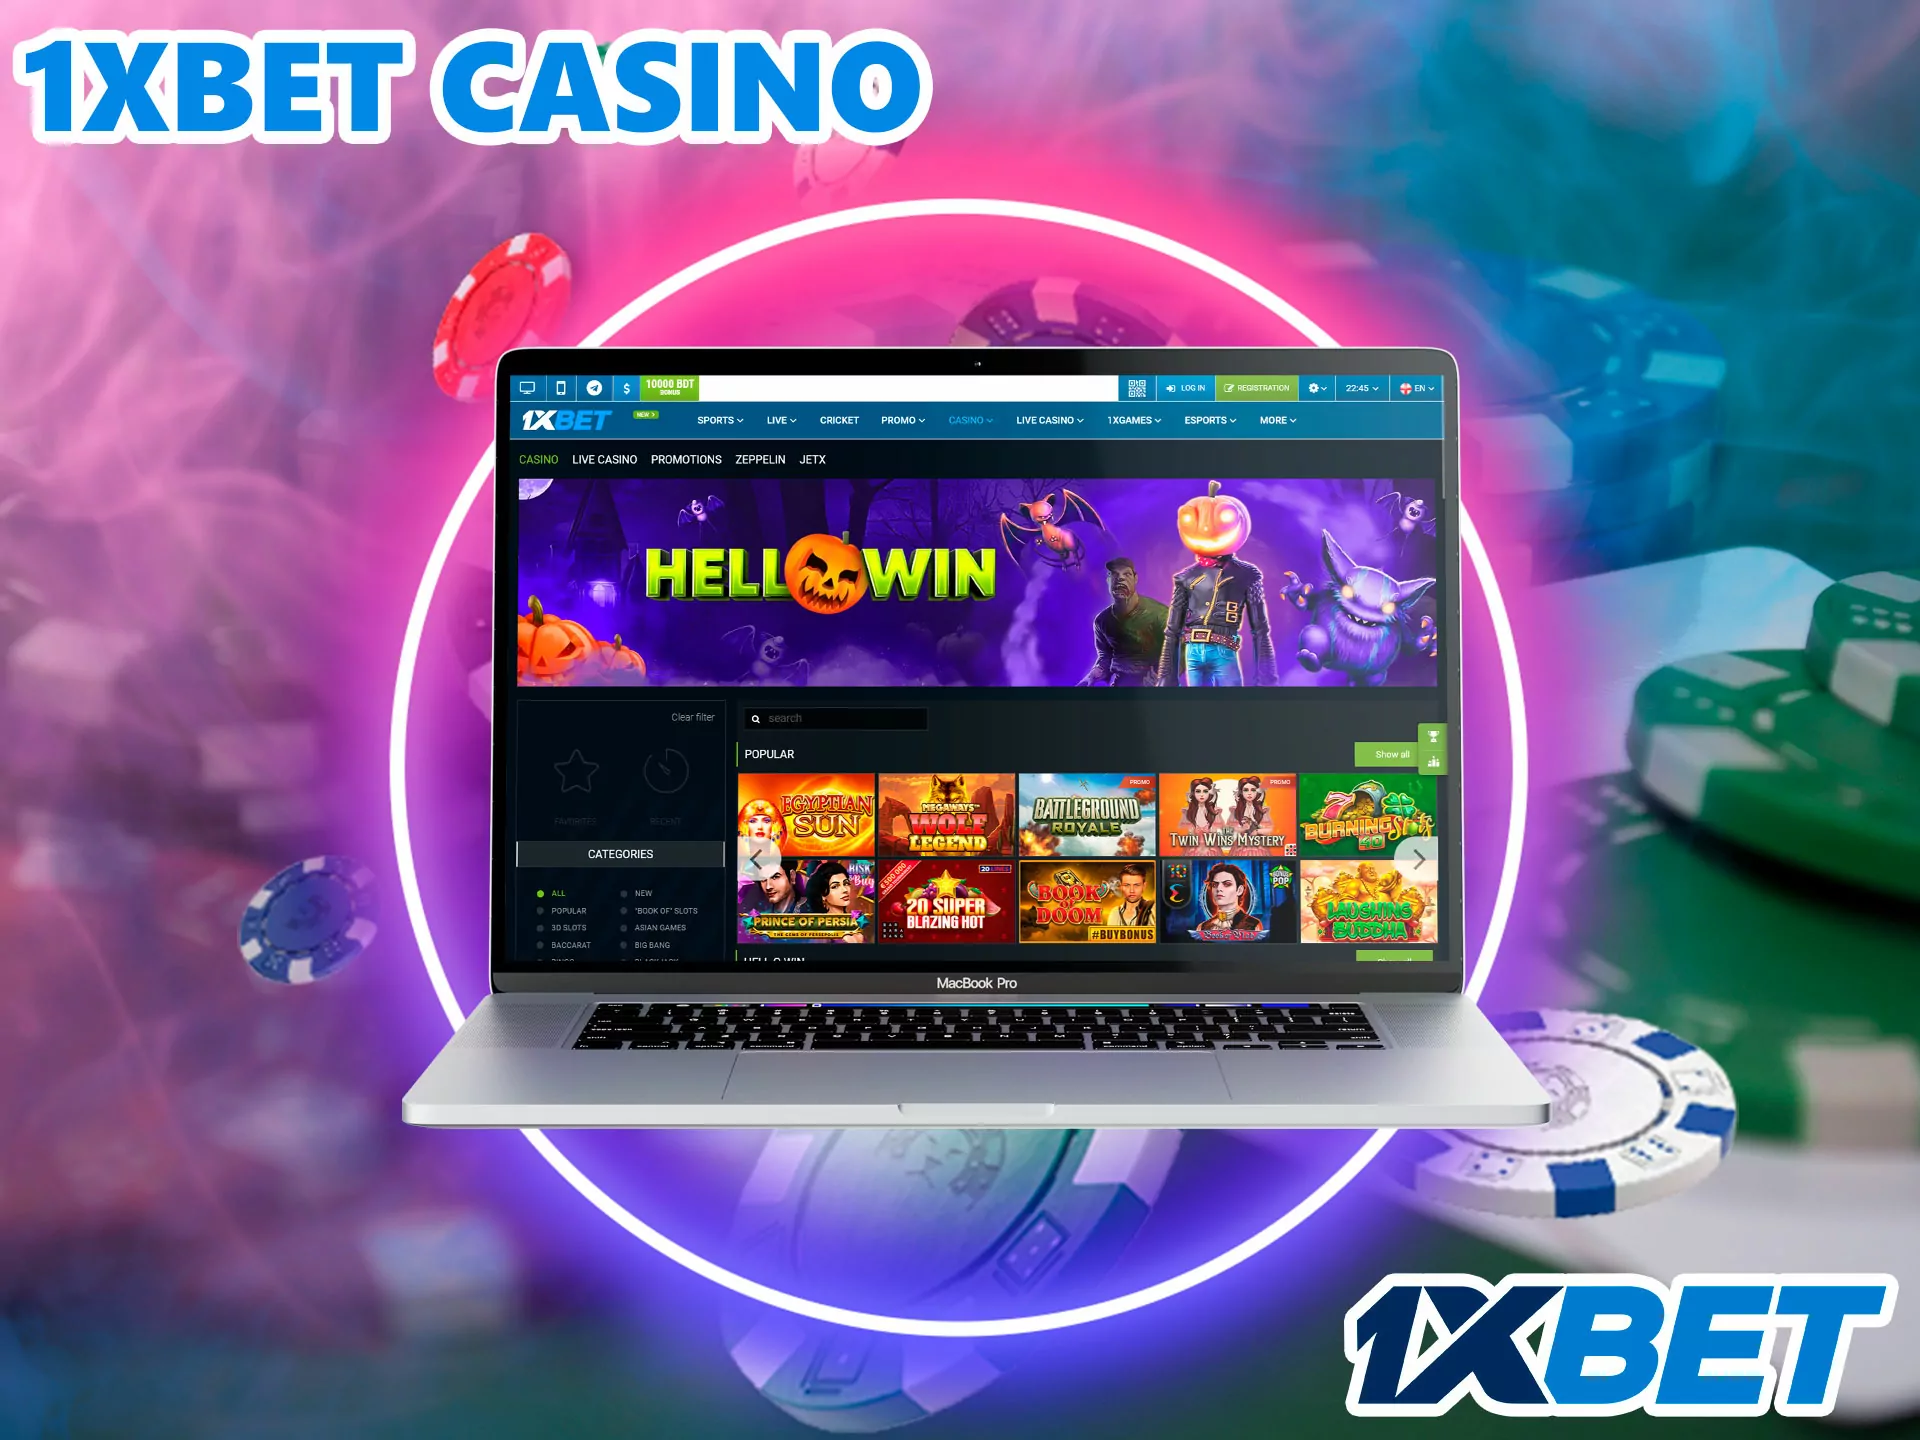 5000 different entertainments, everyone will find something for themselves, games have a different design, a set of functions, there will be different options for playing and bonuses.